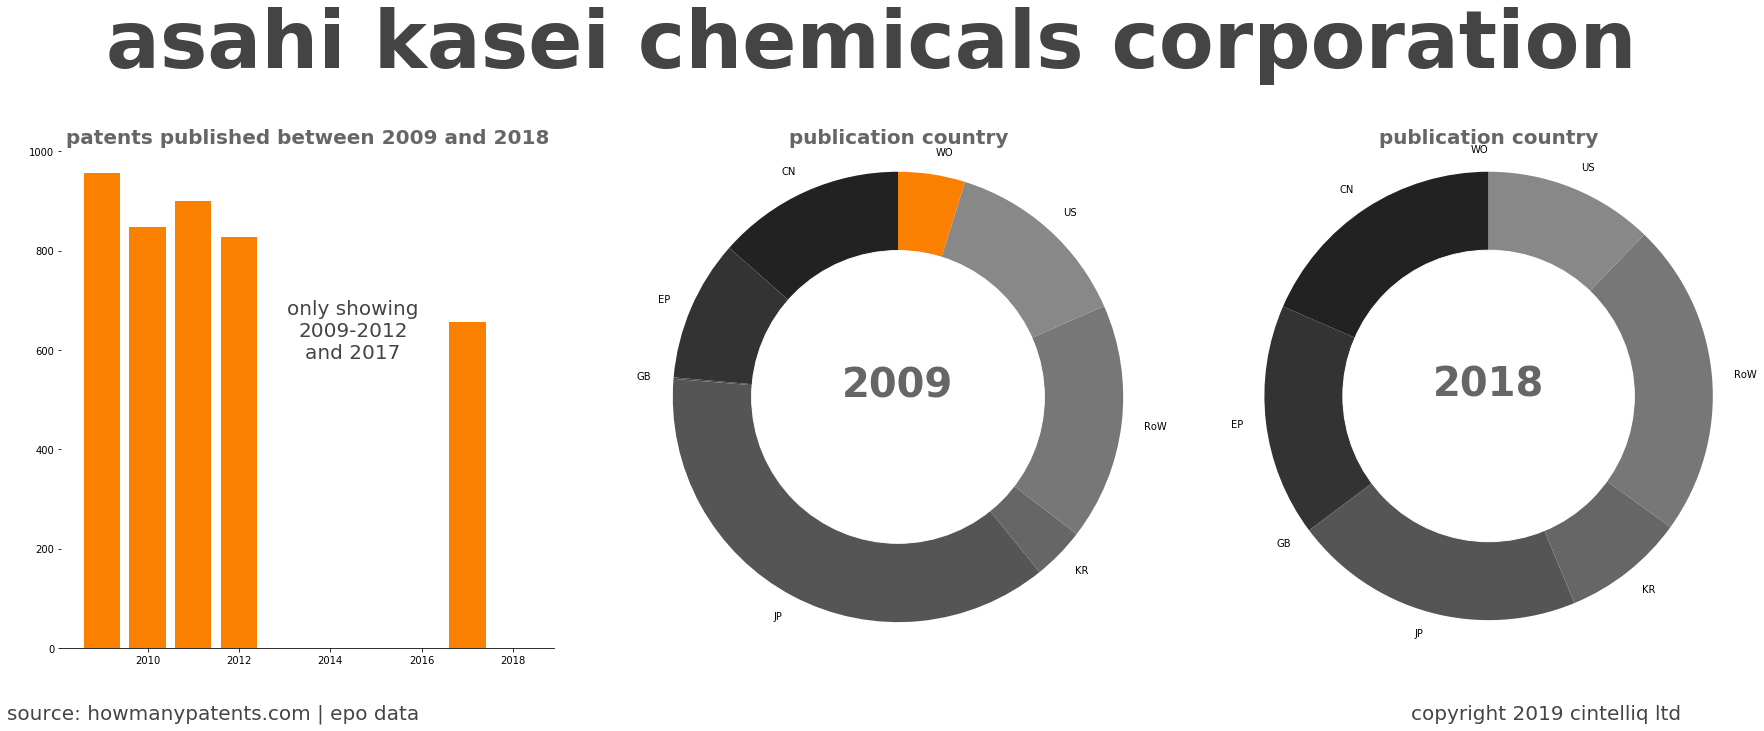 summary of patents for Asahi Kasei Chemicals Corporation